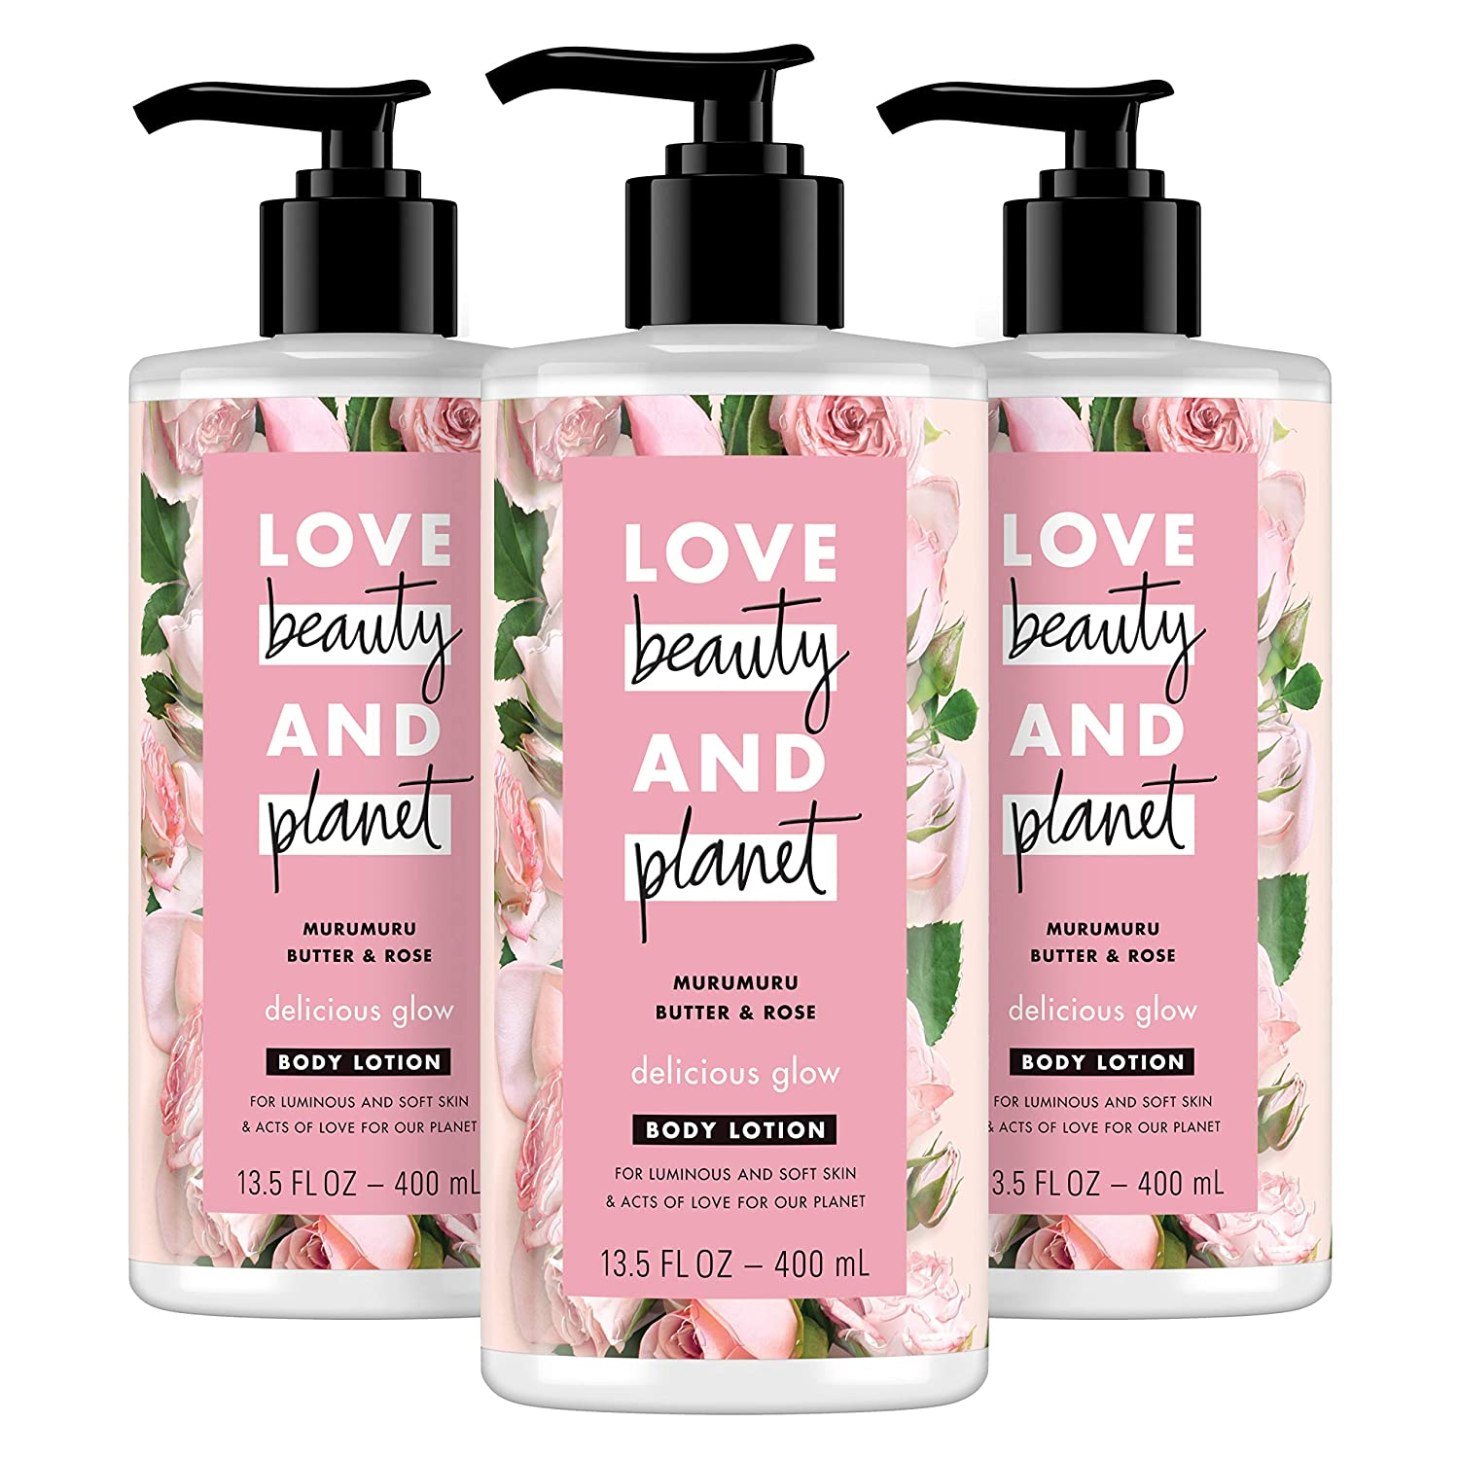 Love Beauty and Planet Delicious Glow Body Lotion, Amazon Winter Skin-Care Sale